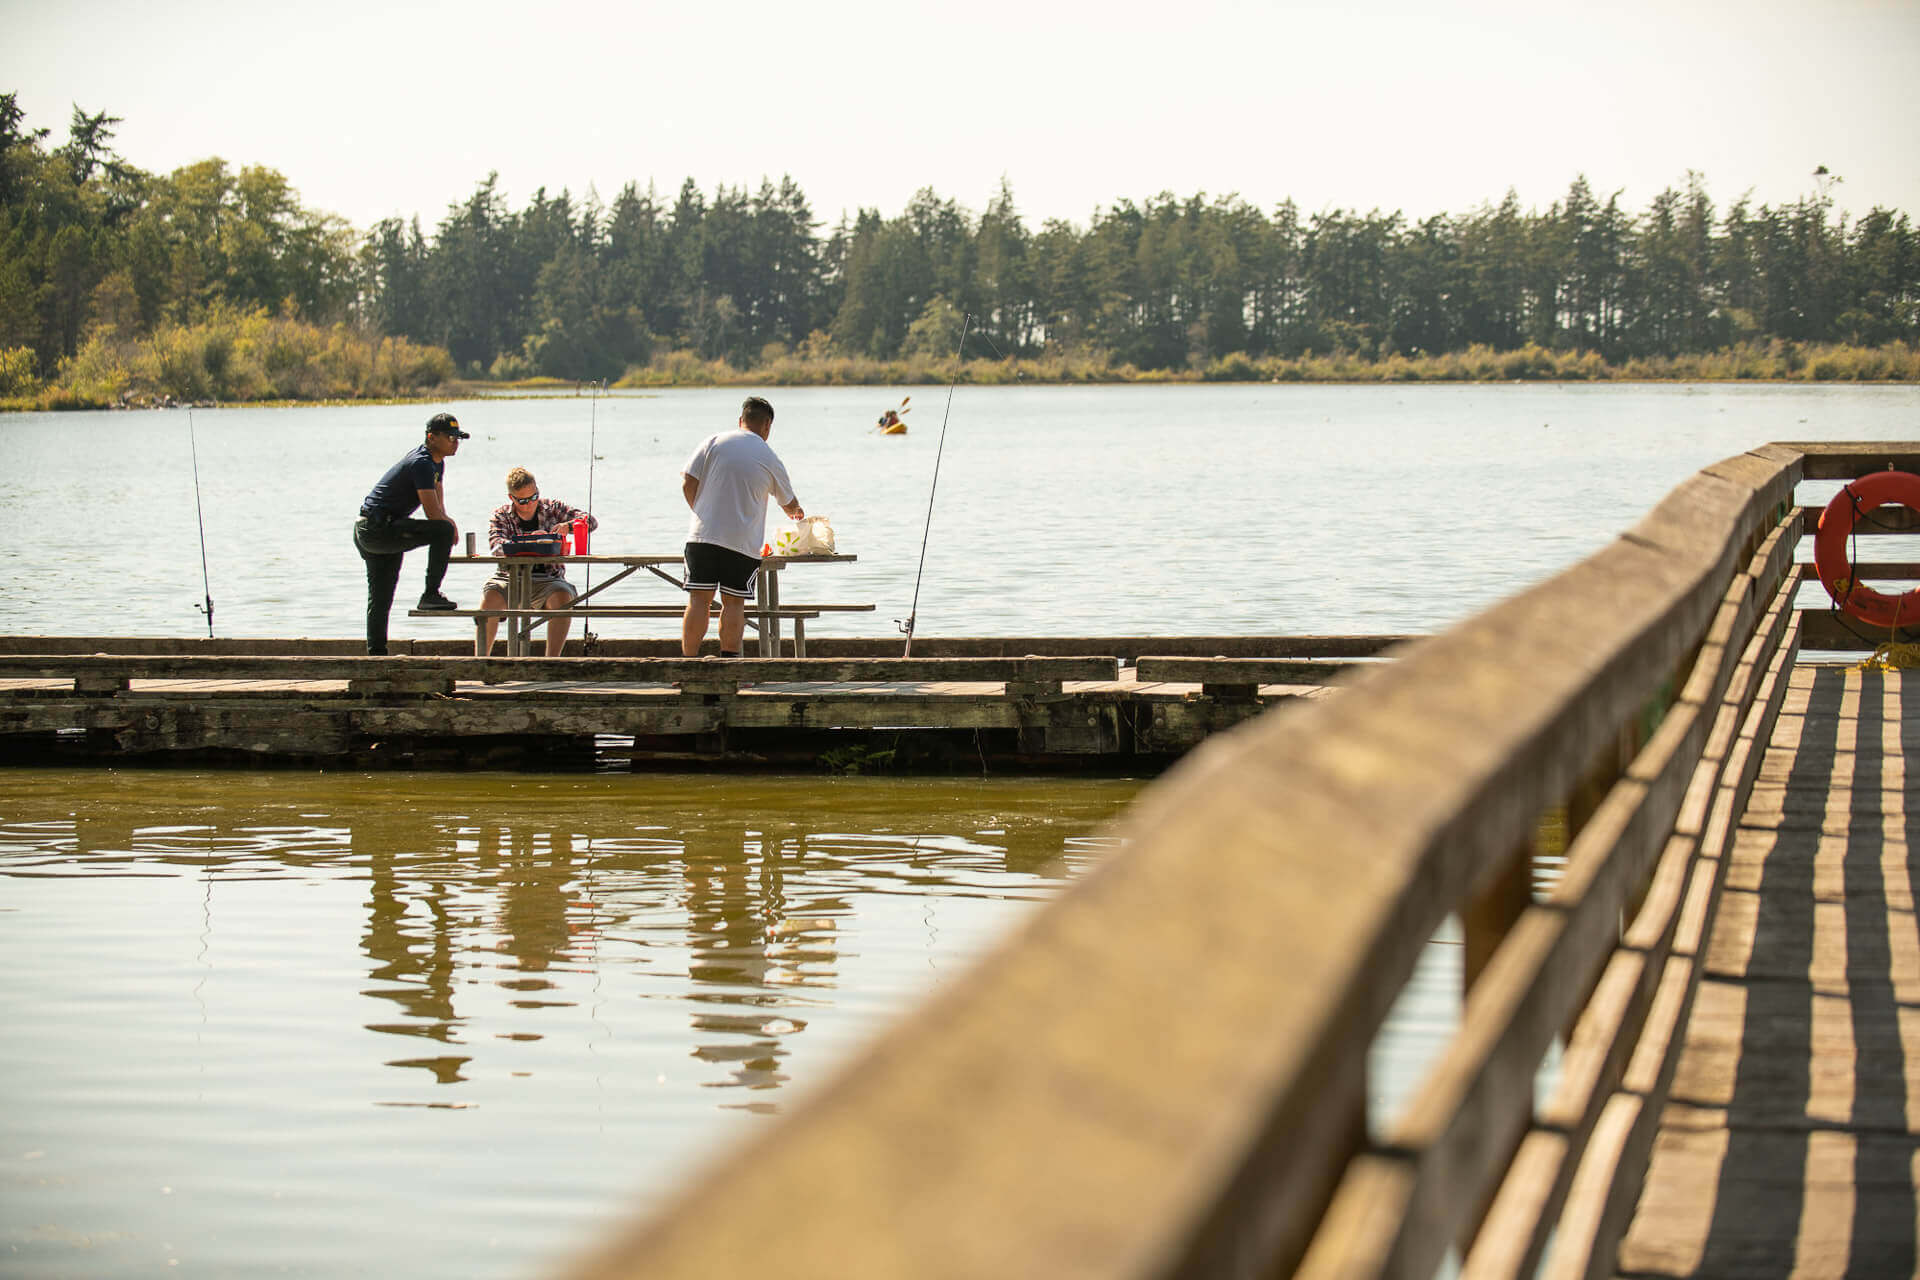 Three people fish from a peir over the water at Deception Pass State Park